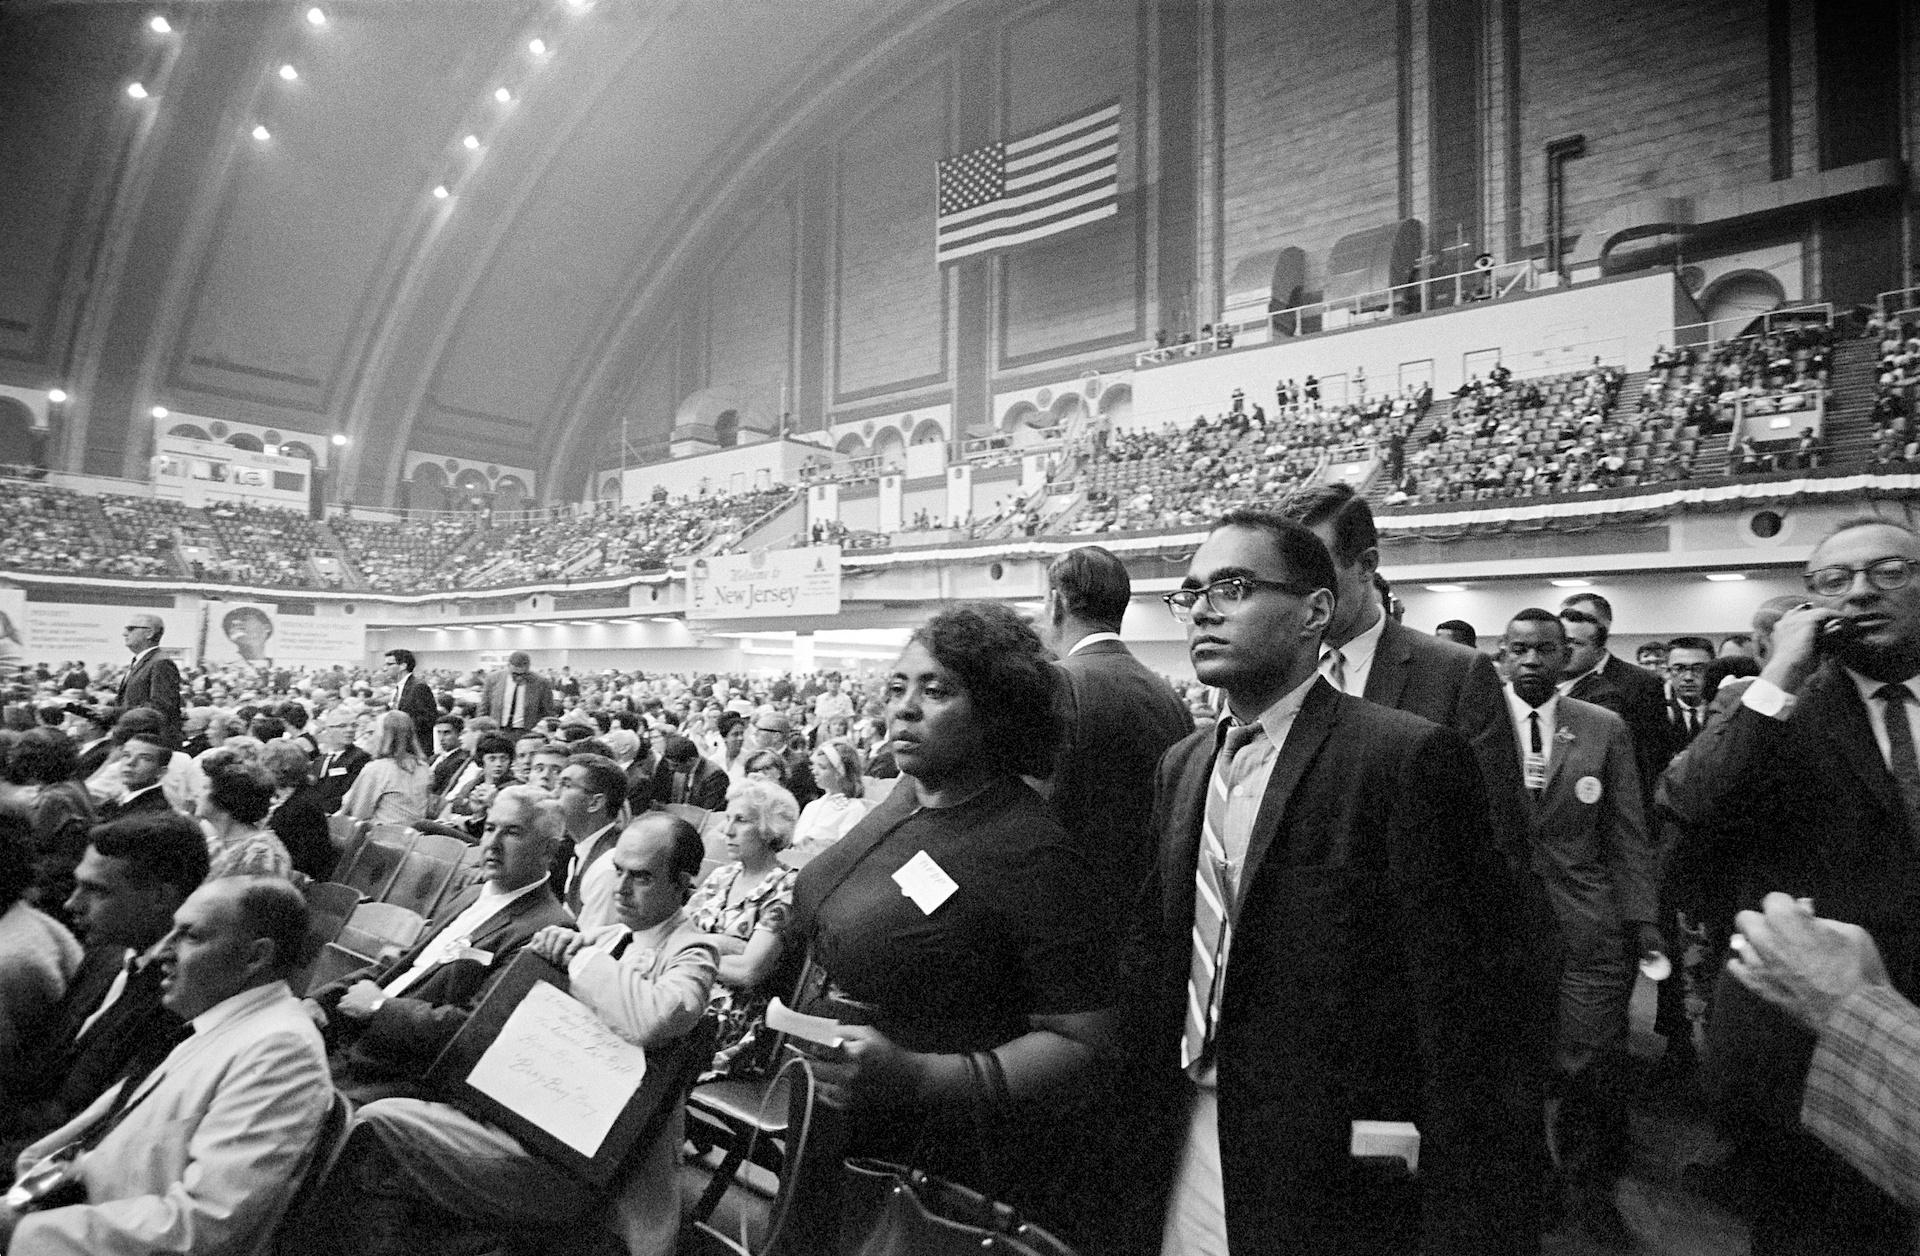 August 10, 1964. MFDP delegates challenge Mississippi Democrats at Democratic Convention. Inside convention hall: Fannie Lou Hamer and Bob Moses assess the Mississippi seating situation.